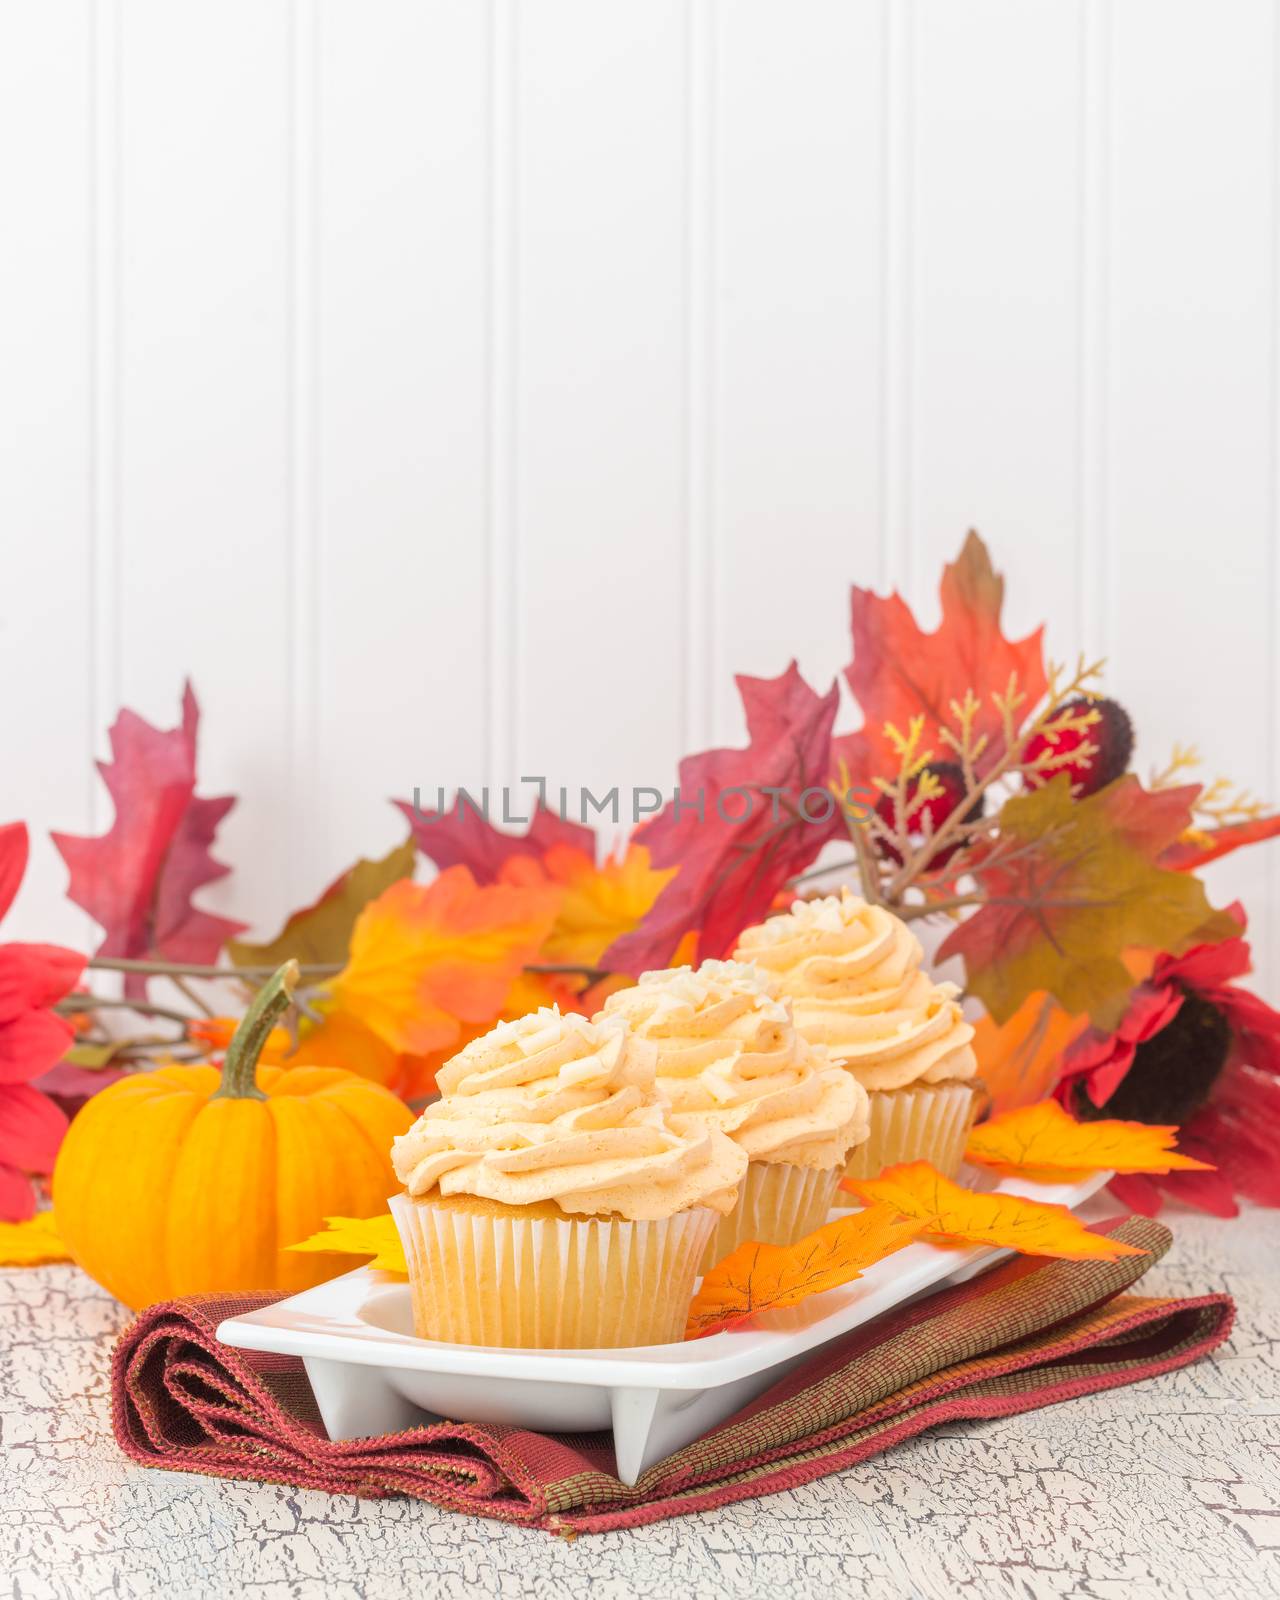 Three pumpkin spice cupcakes surrounded by beautiful fall foliage.